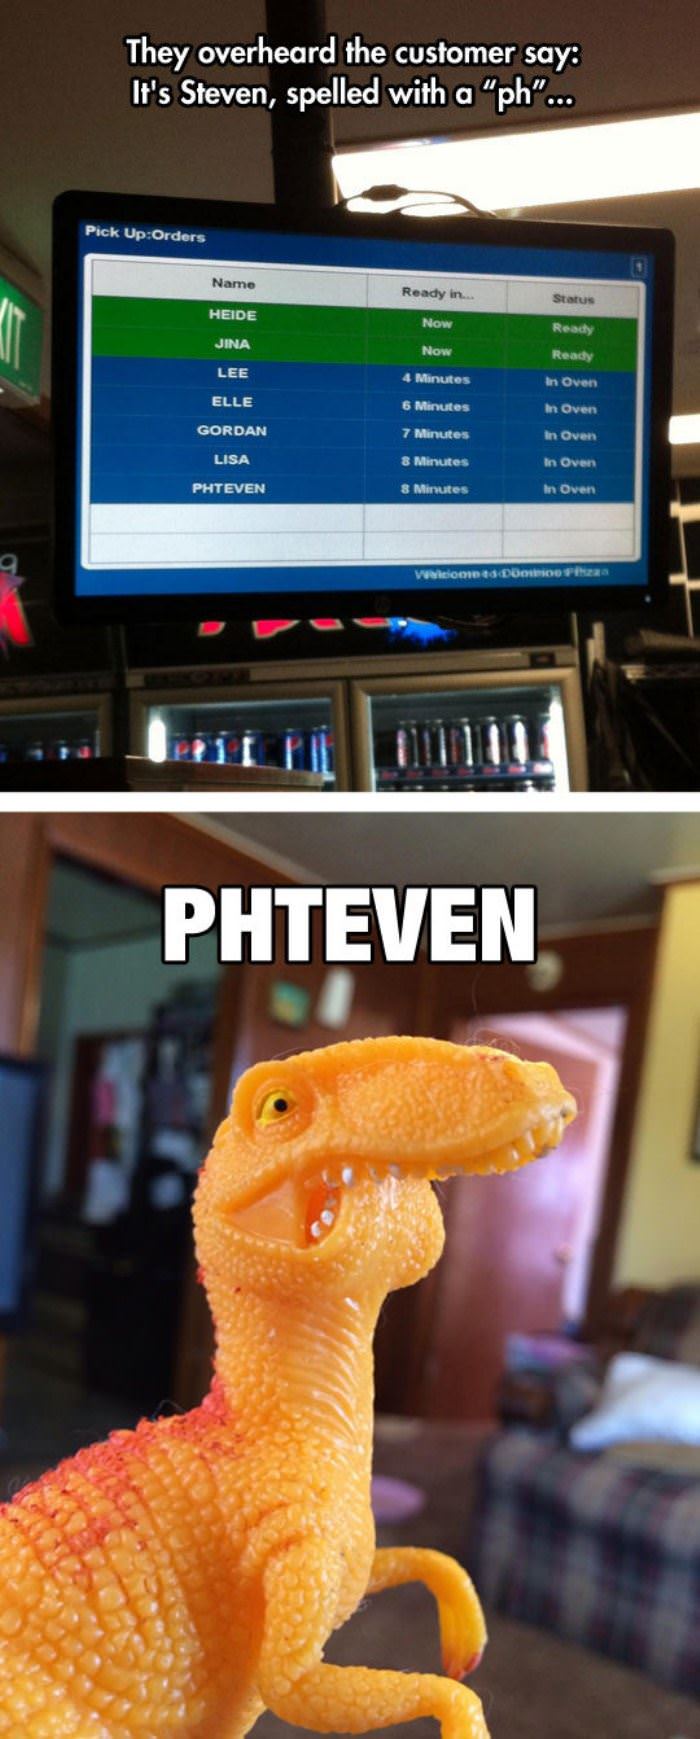 phteven is my name funny picture